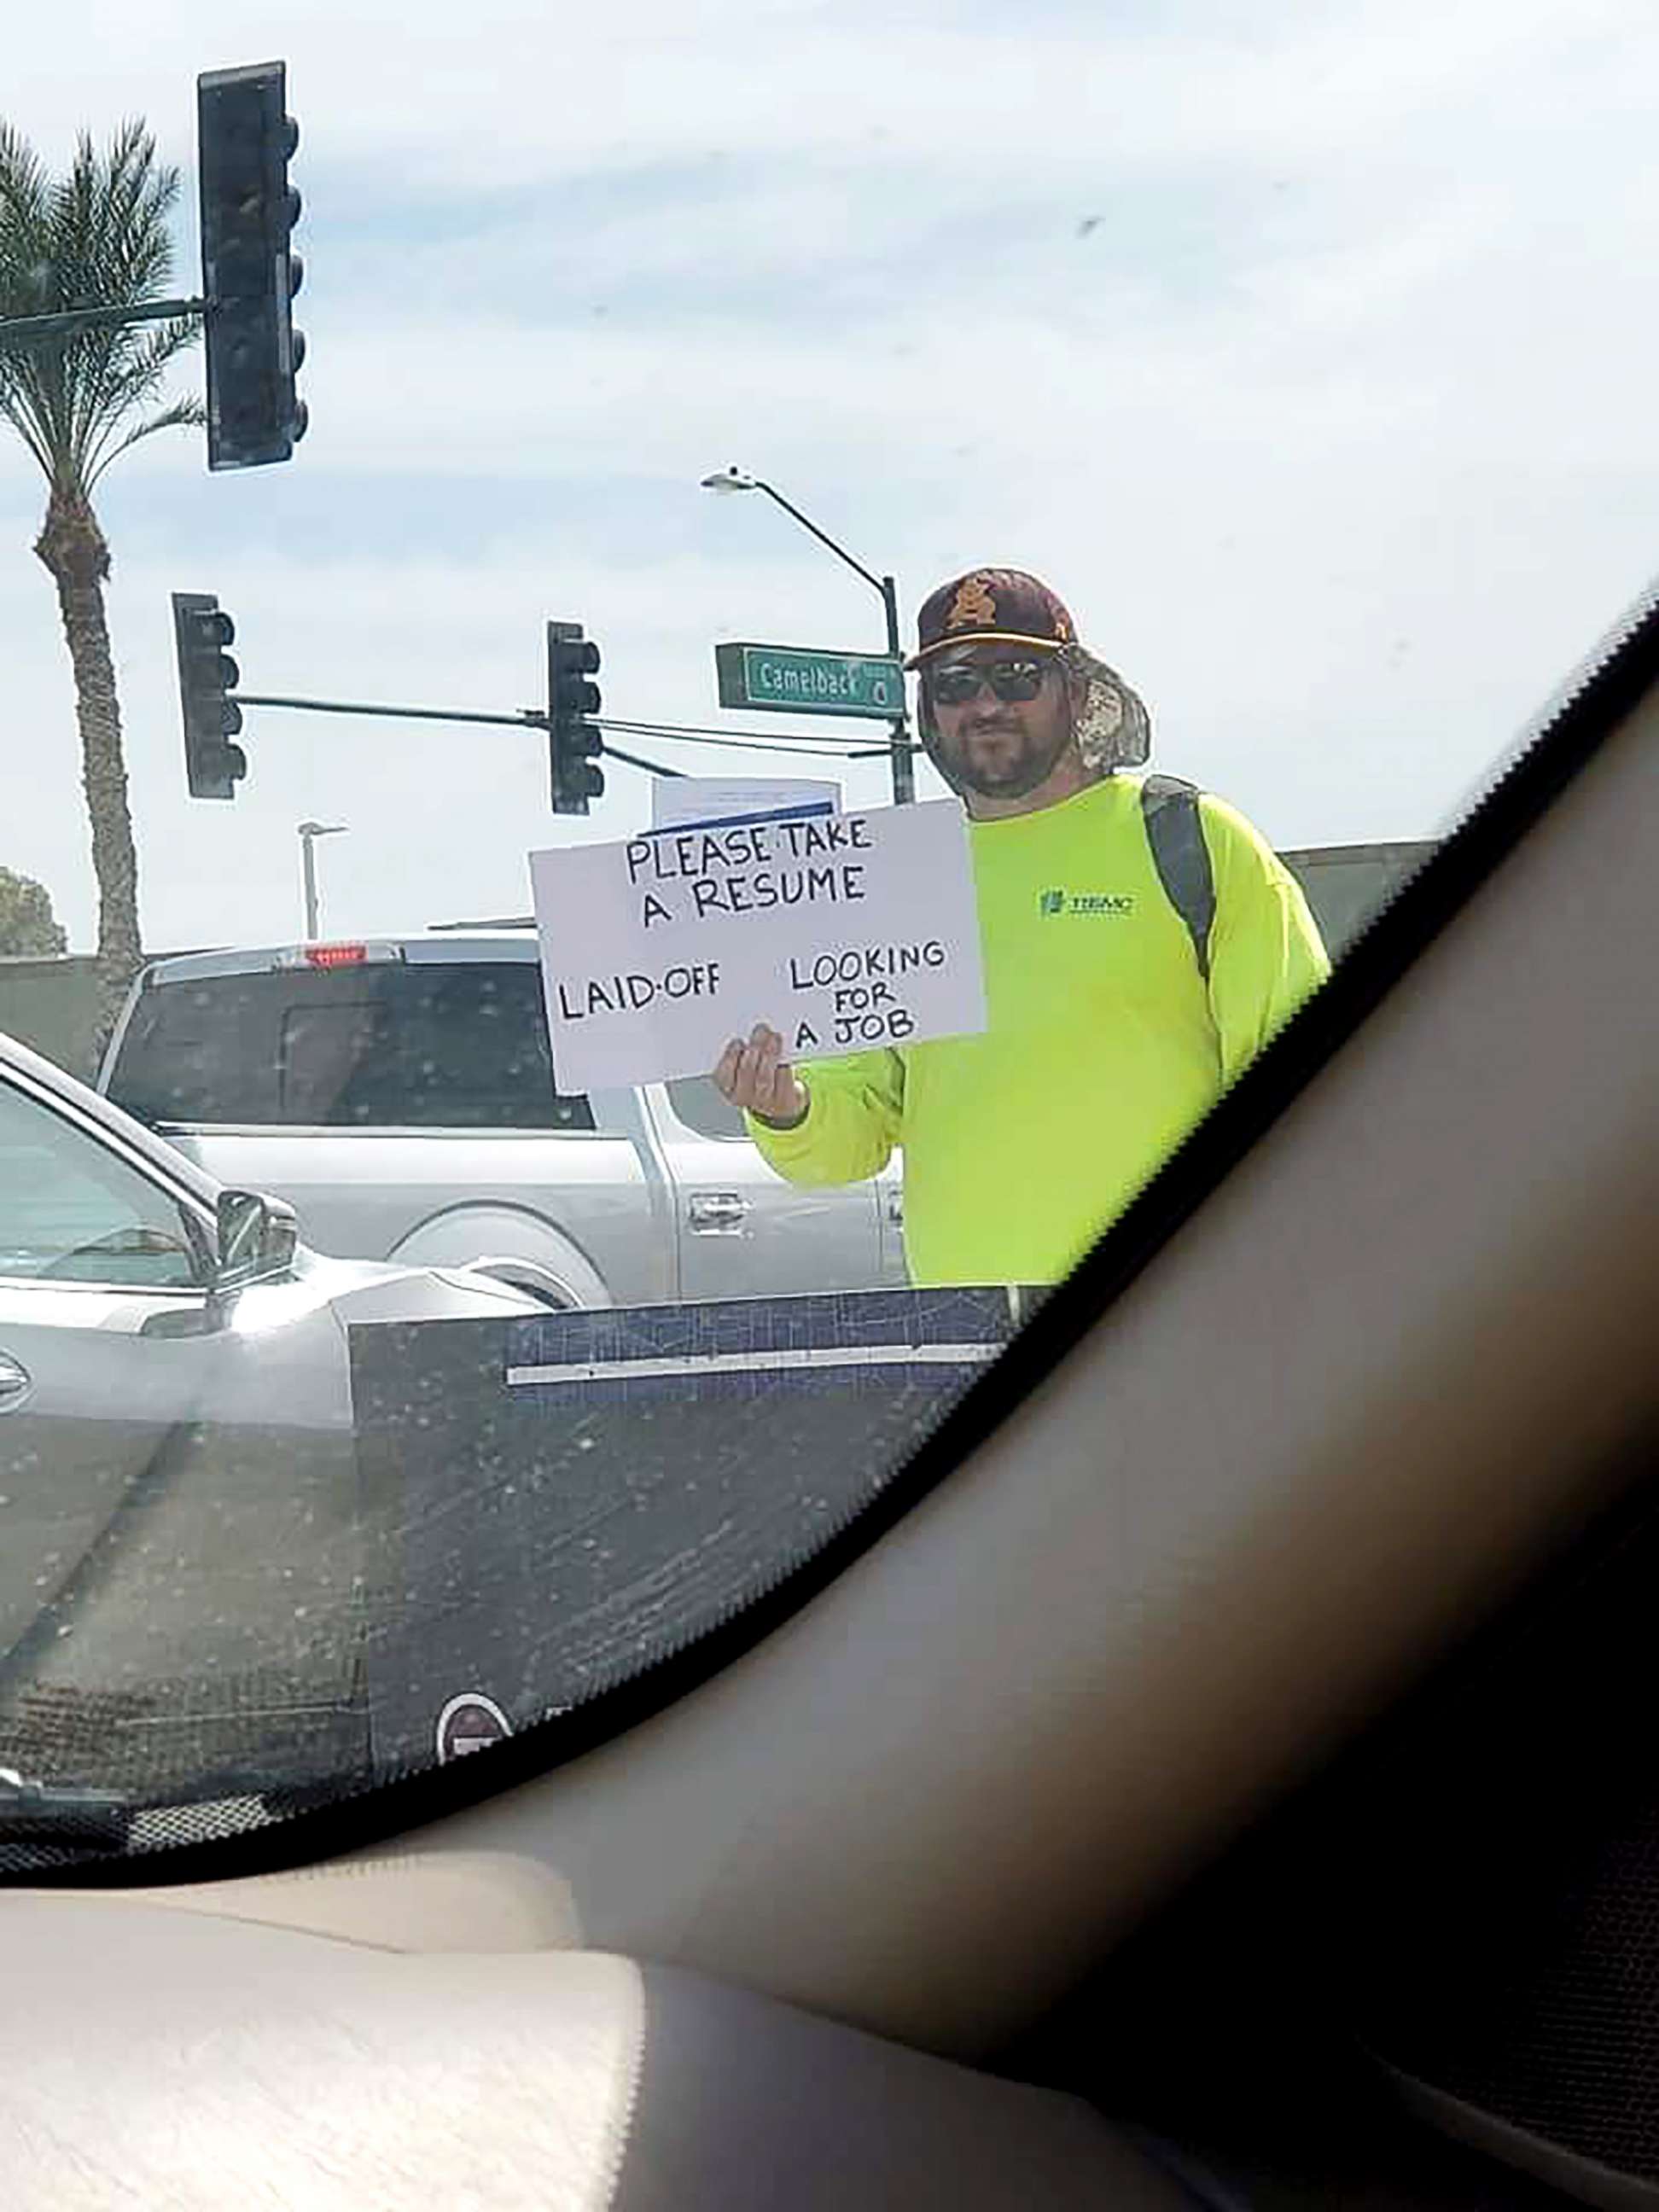 PHOTO: Patrick Hoagland received hundreds of job offers during his 3-day visits to busy intersections in Phoenix.